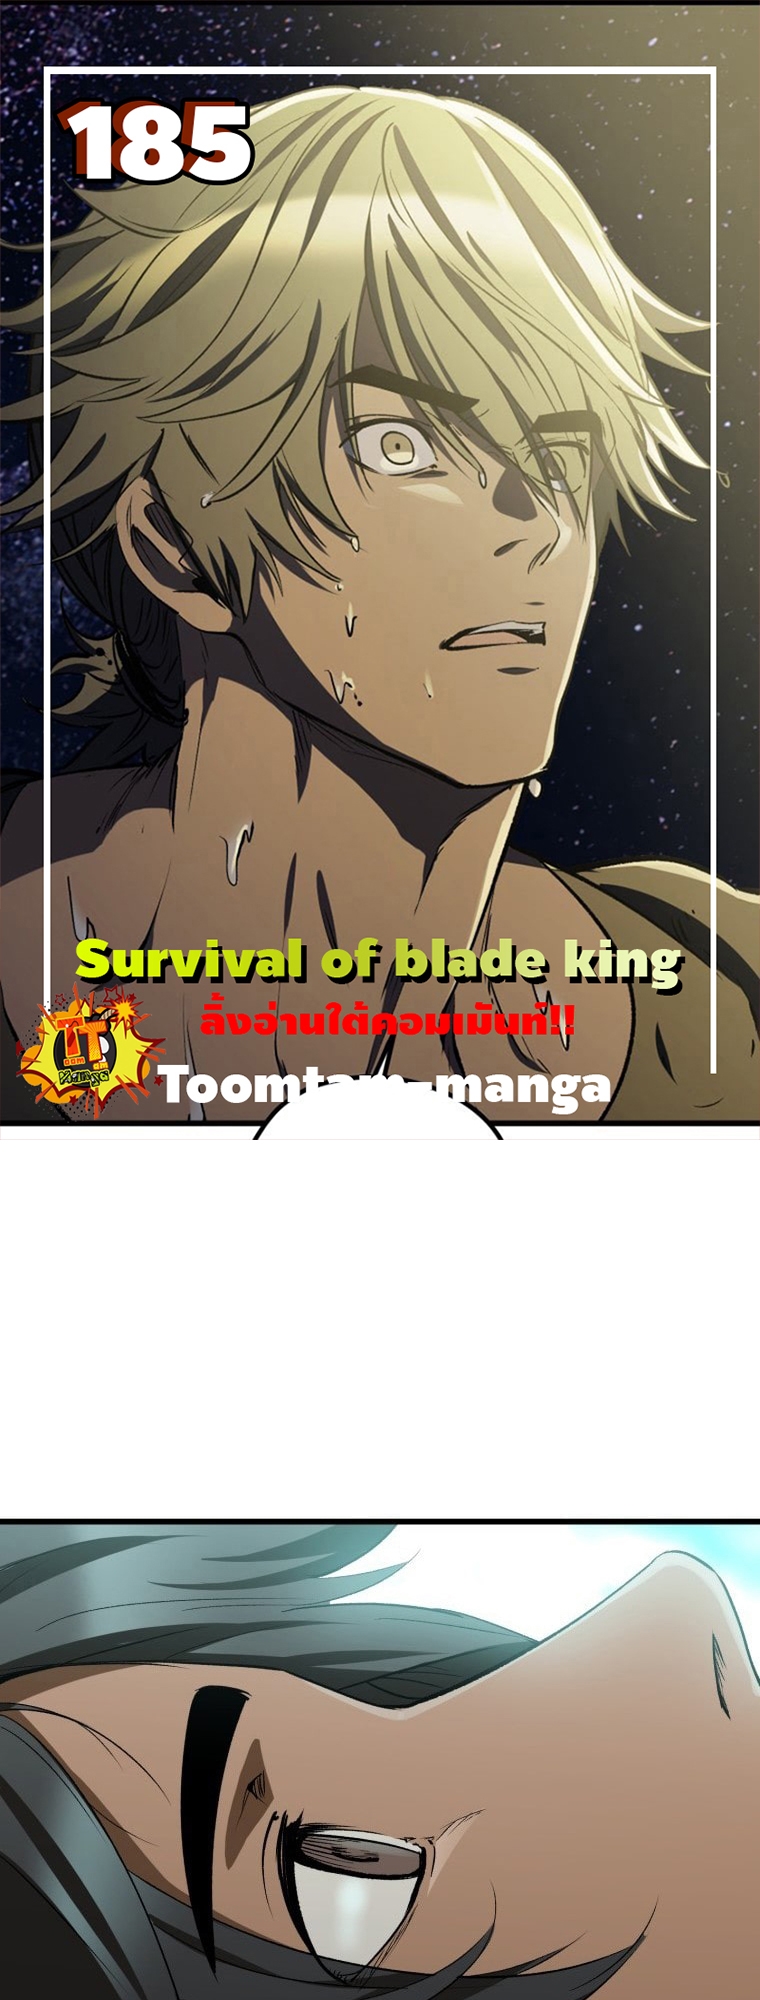 Survival of blade king 185 29 09 660001